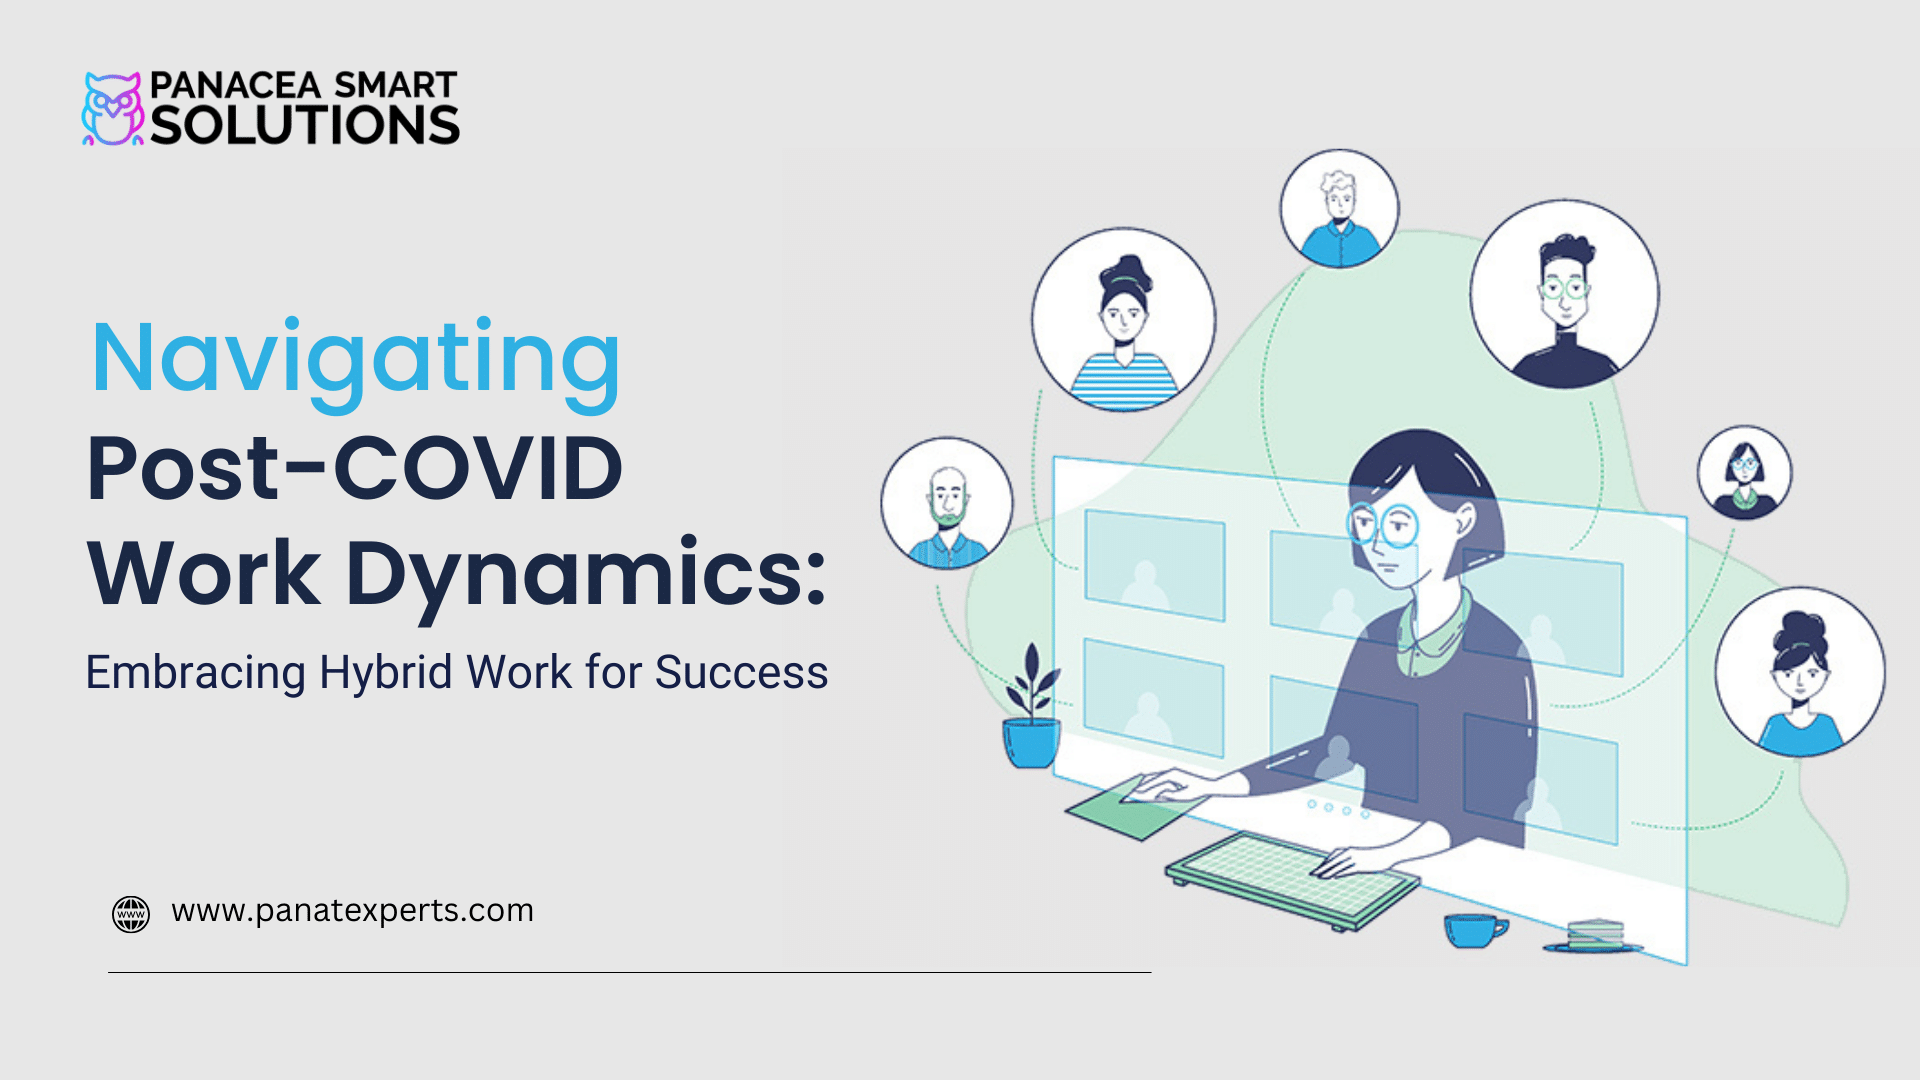 Embracing Hybrid Work for Success